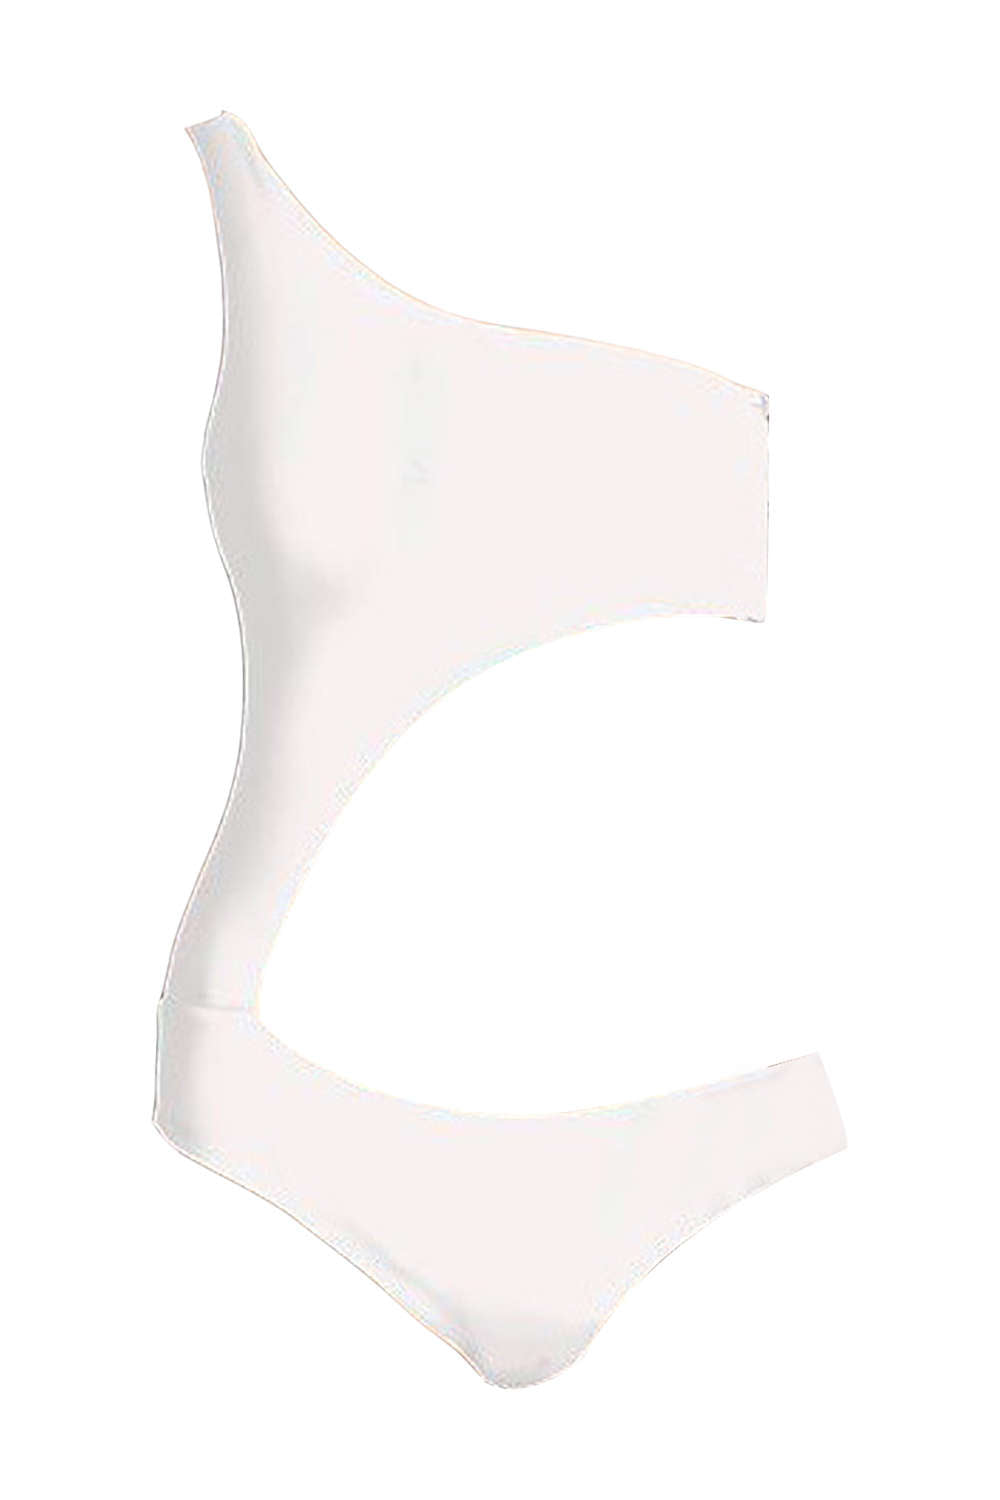 Iyasson Solid Color One-shoulder Side Hollow Design One-piece Swimsuit